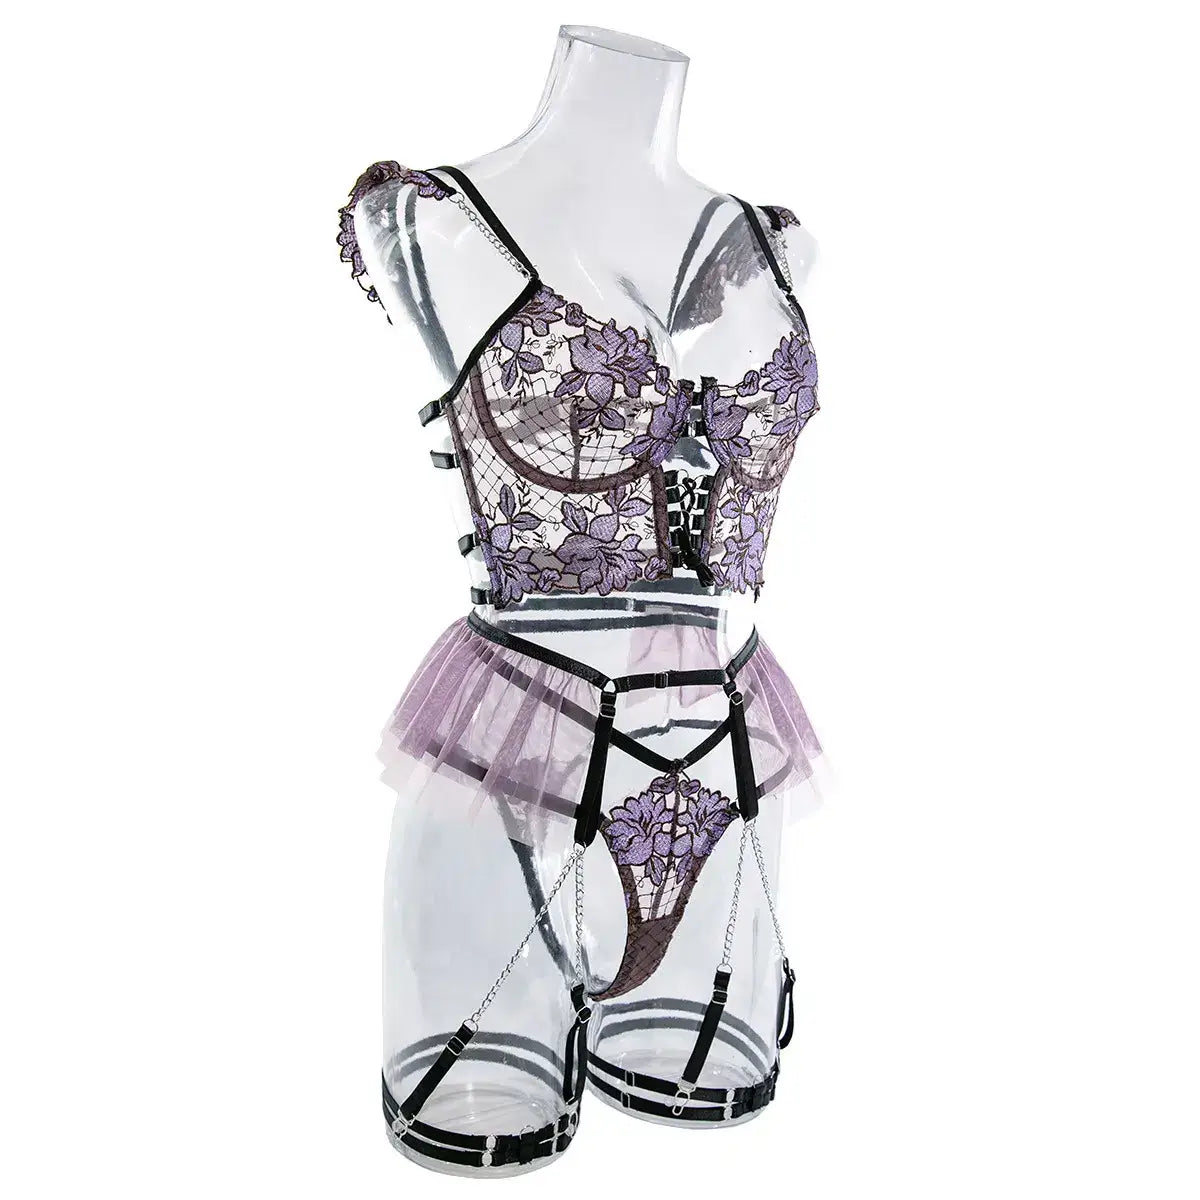 Embroidered mesh bustier set with metal chain shoulder strap - sets